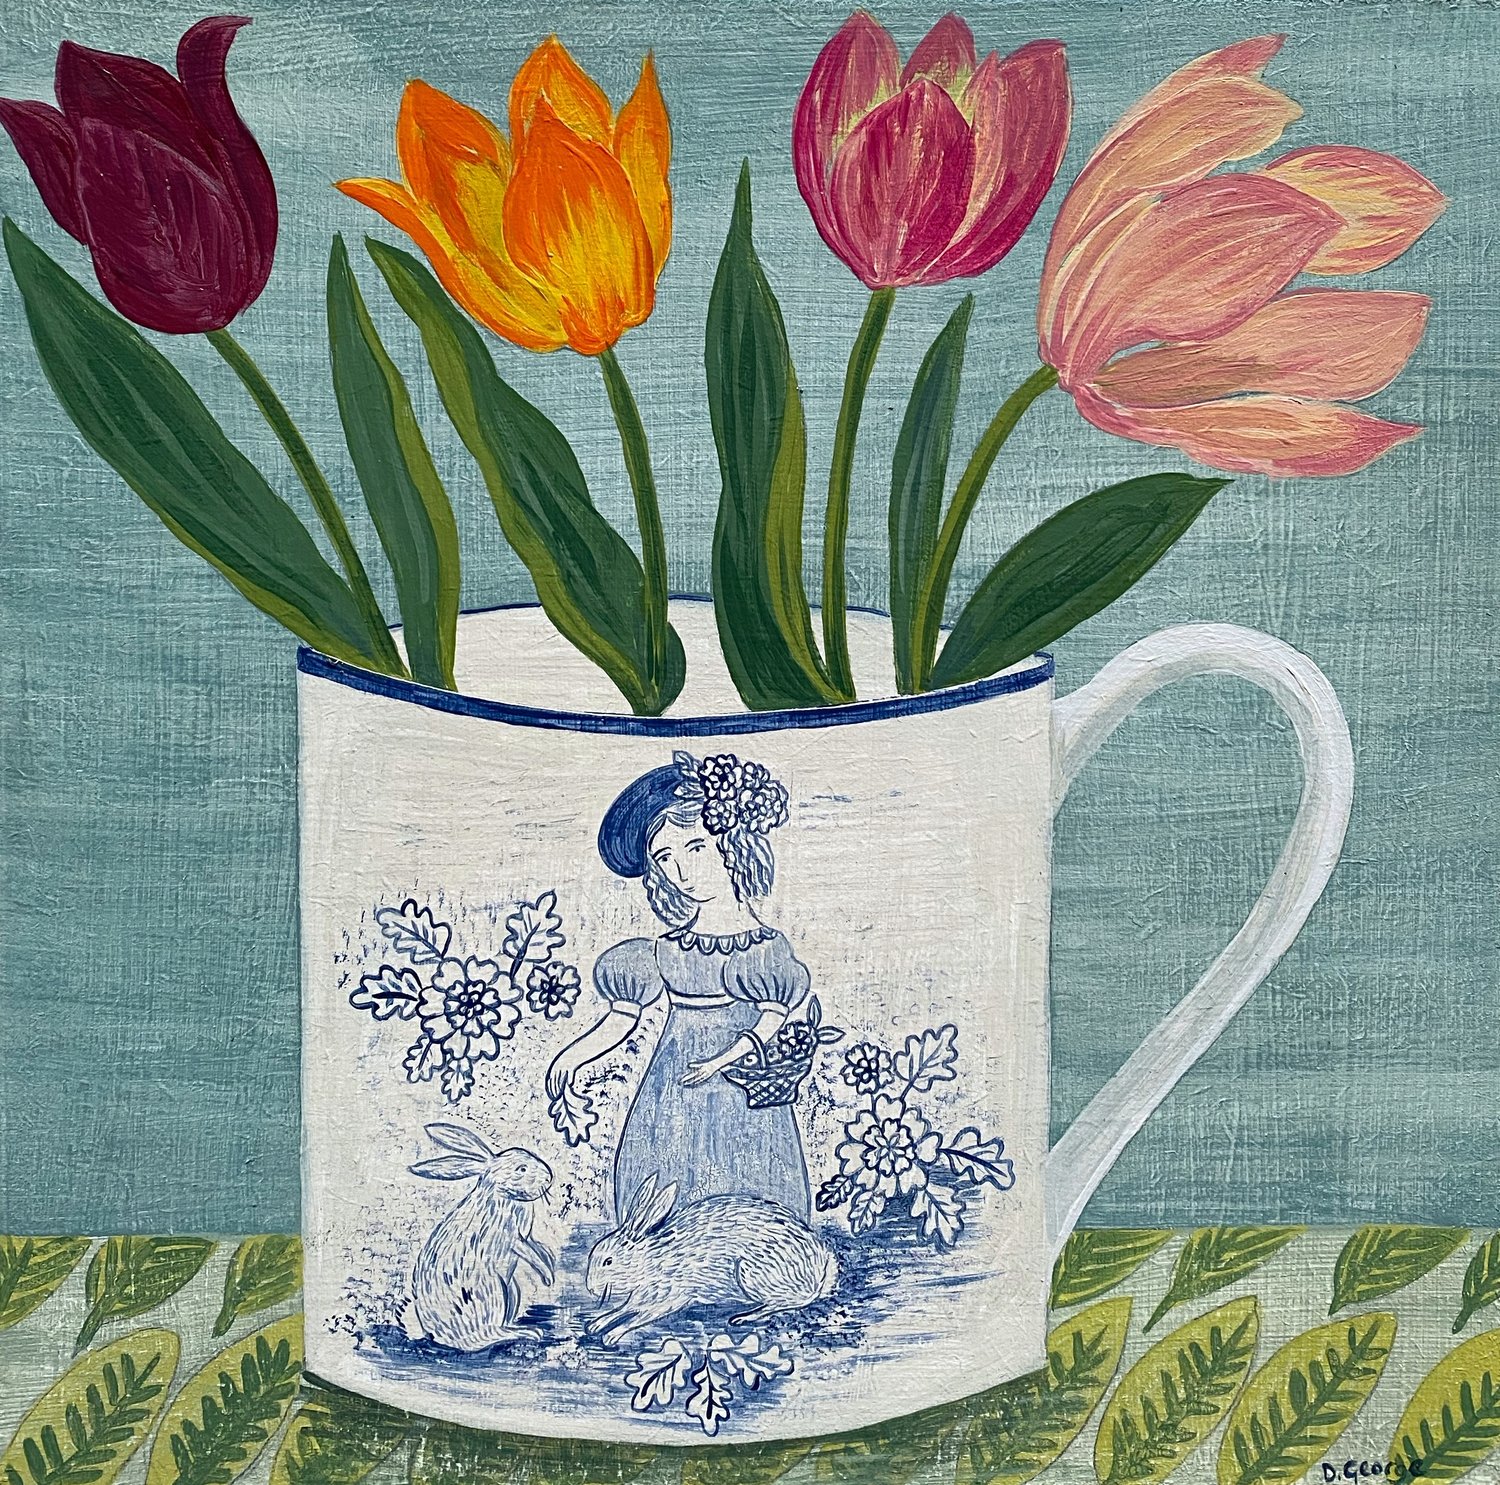 Image of Feeding the rabbits cup and tulips